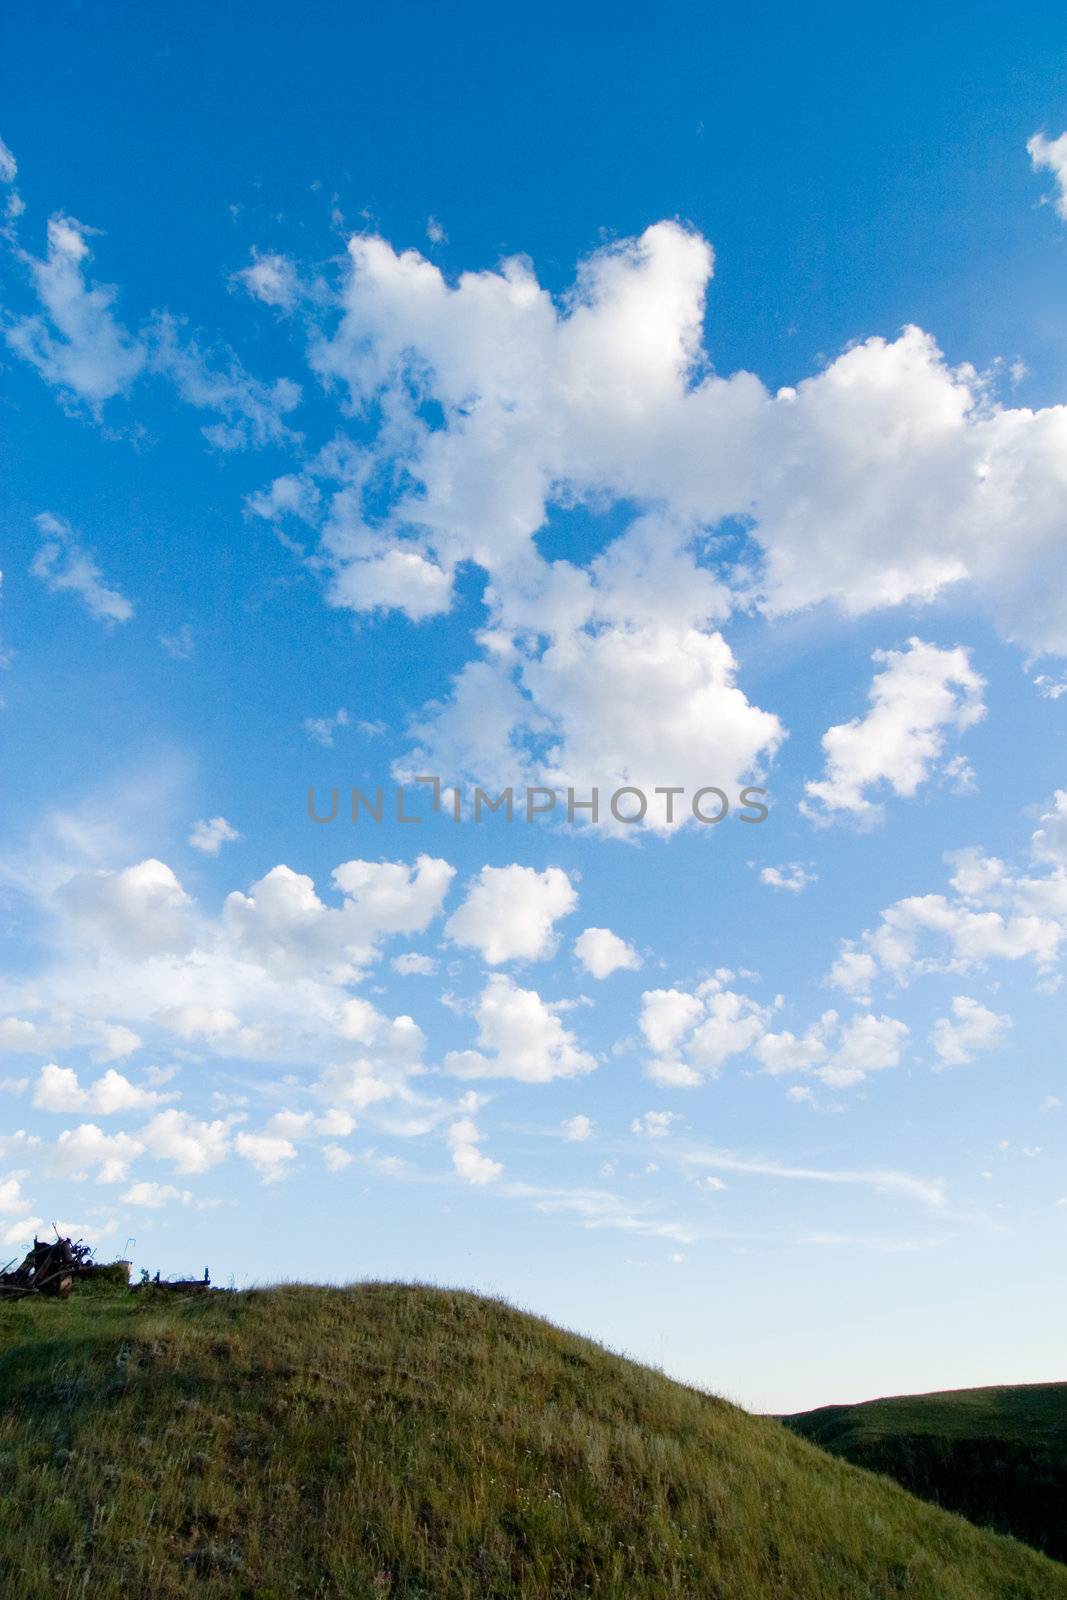 A prairie landscape with large sky.